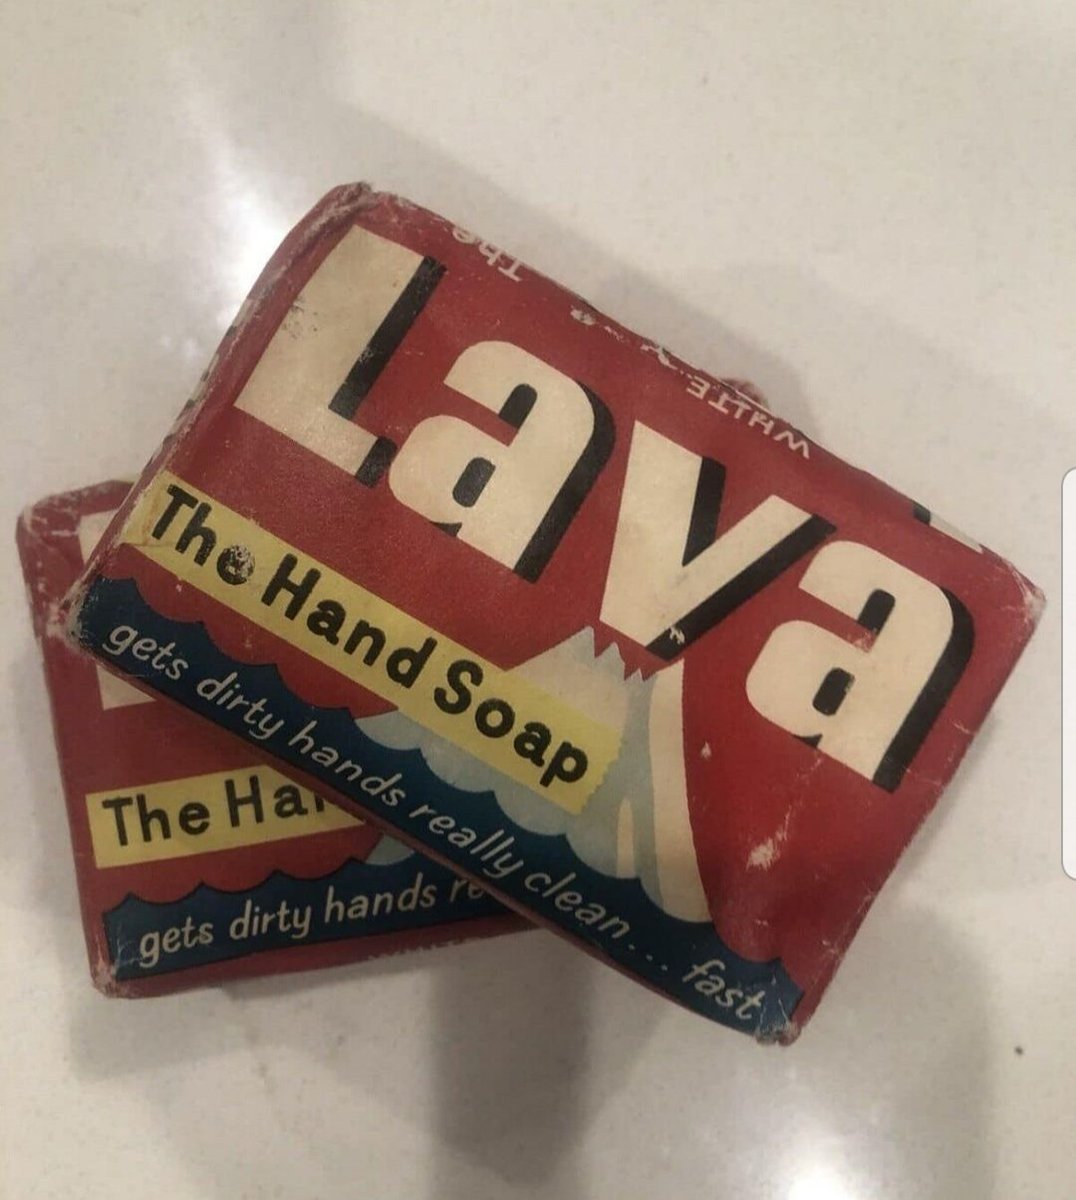 Did you or someone you know use this soap?